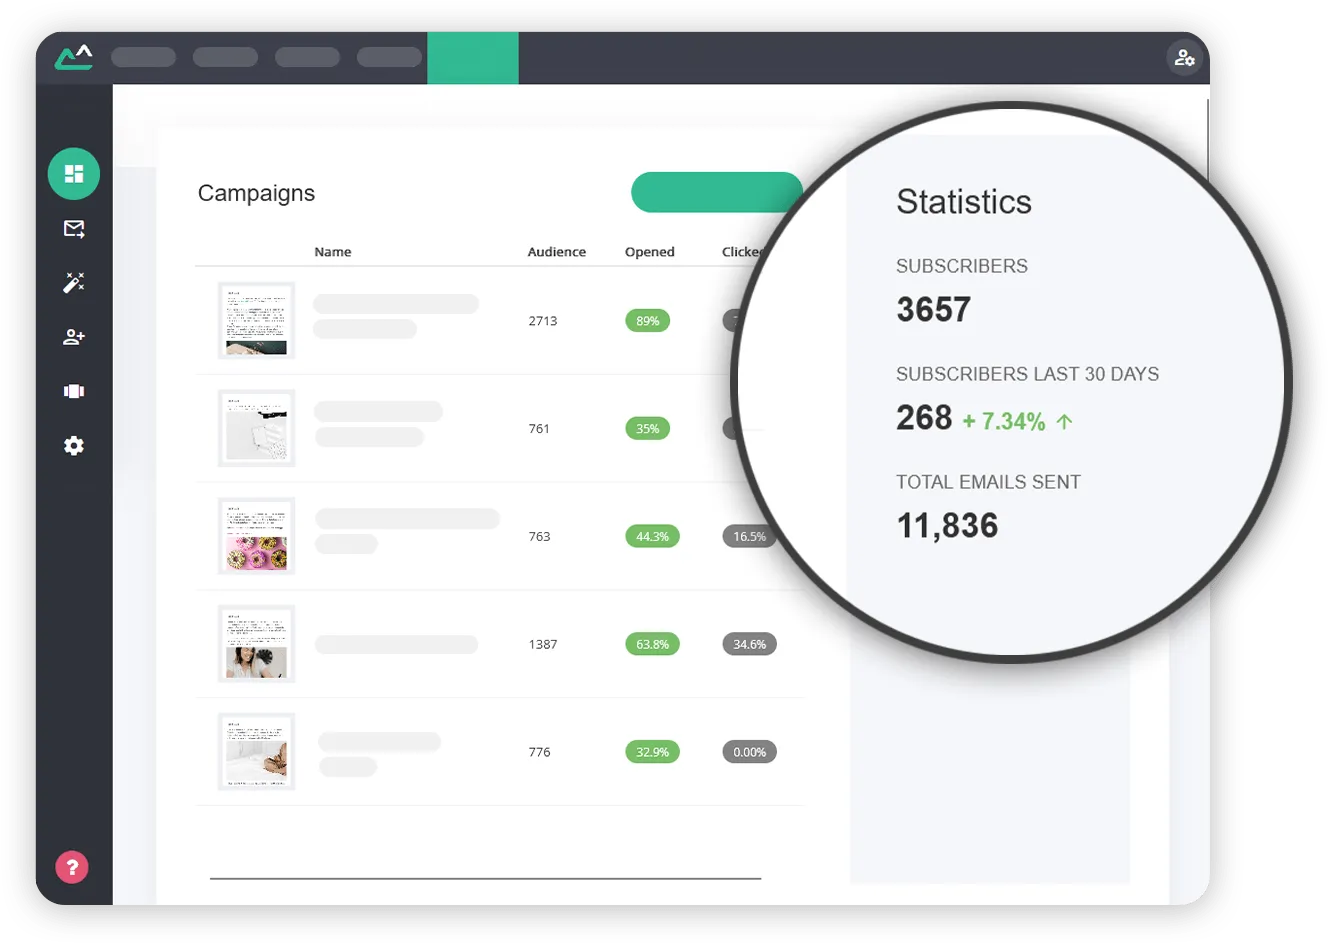 Screenshot of an email campaign dashboard showing subscriber statistics and campaign performance metrics.